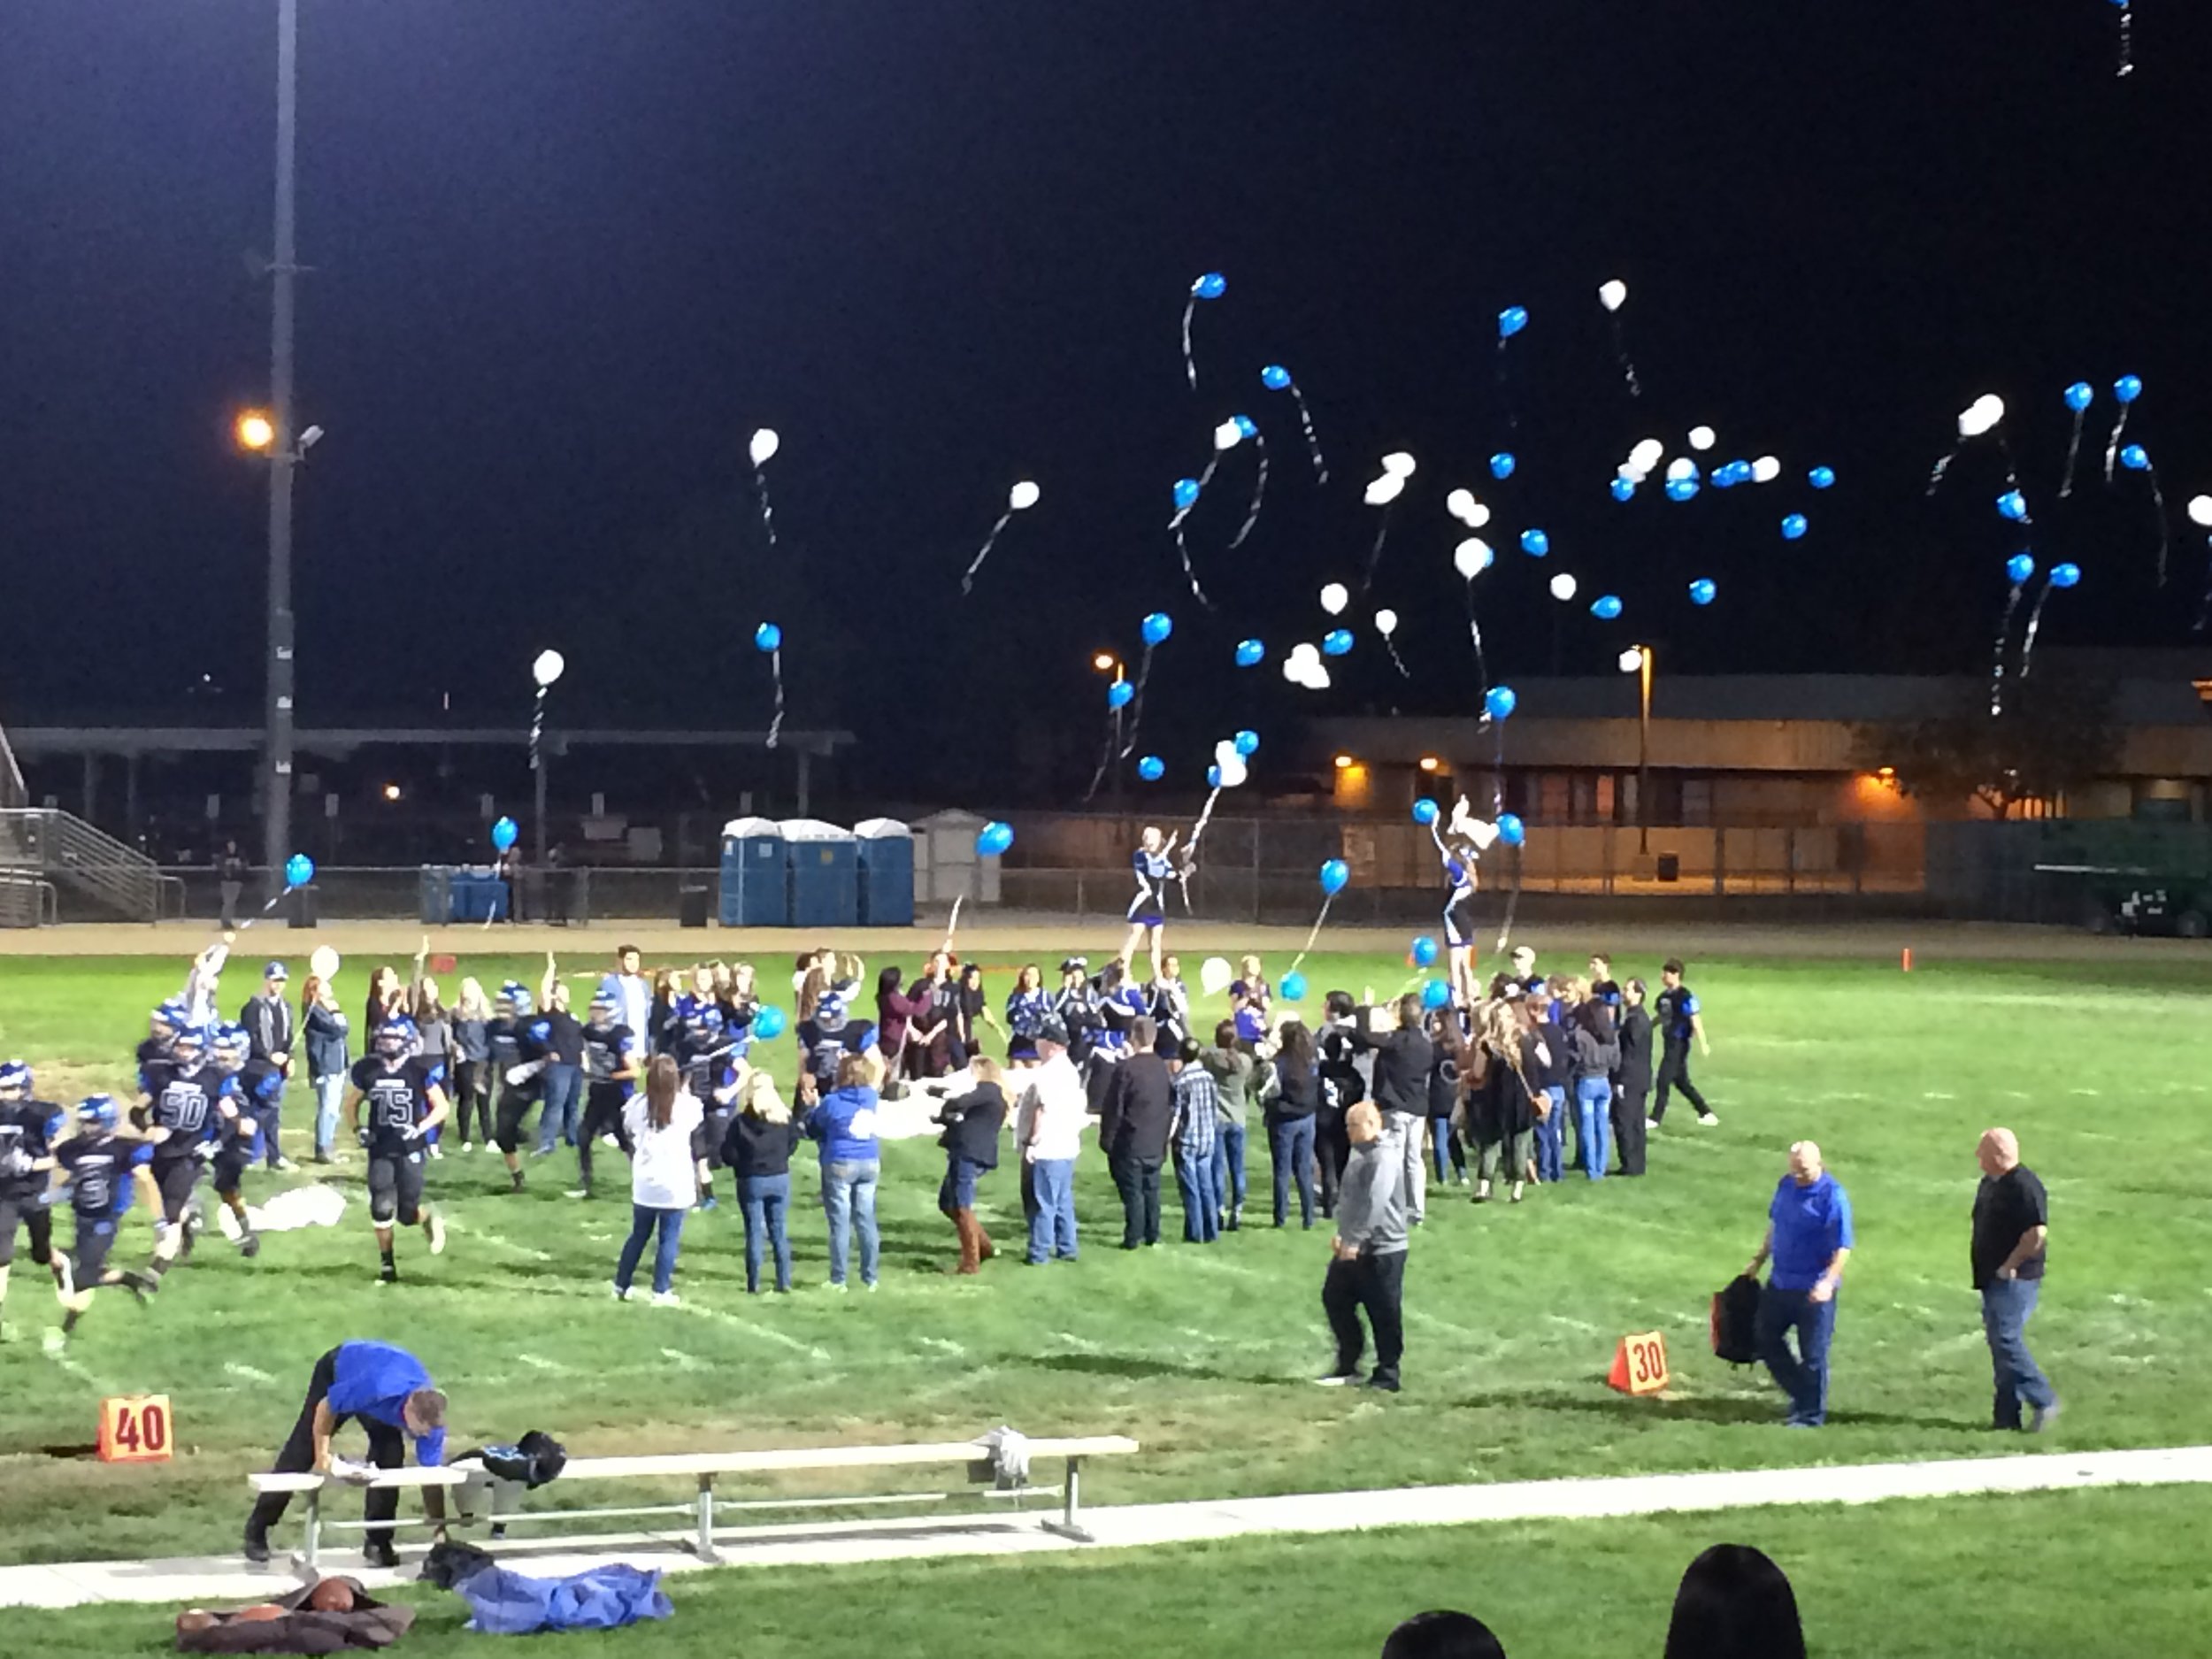 football field with a crowd and cheerleaders and balloons. 